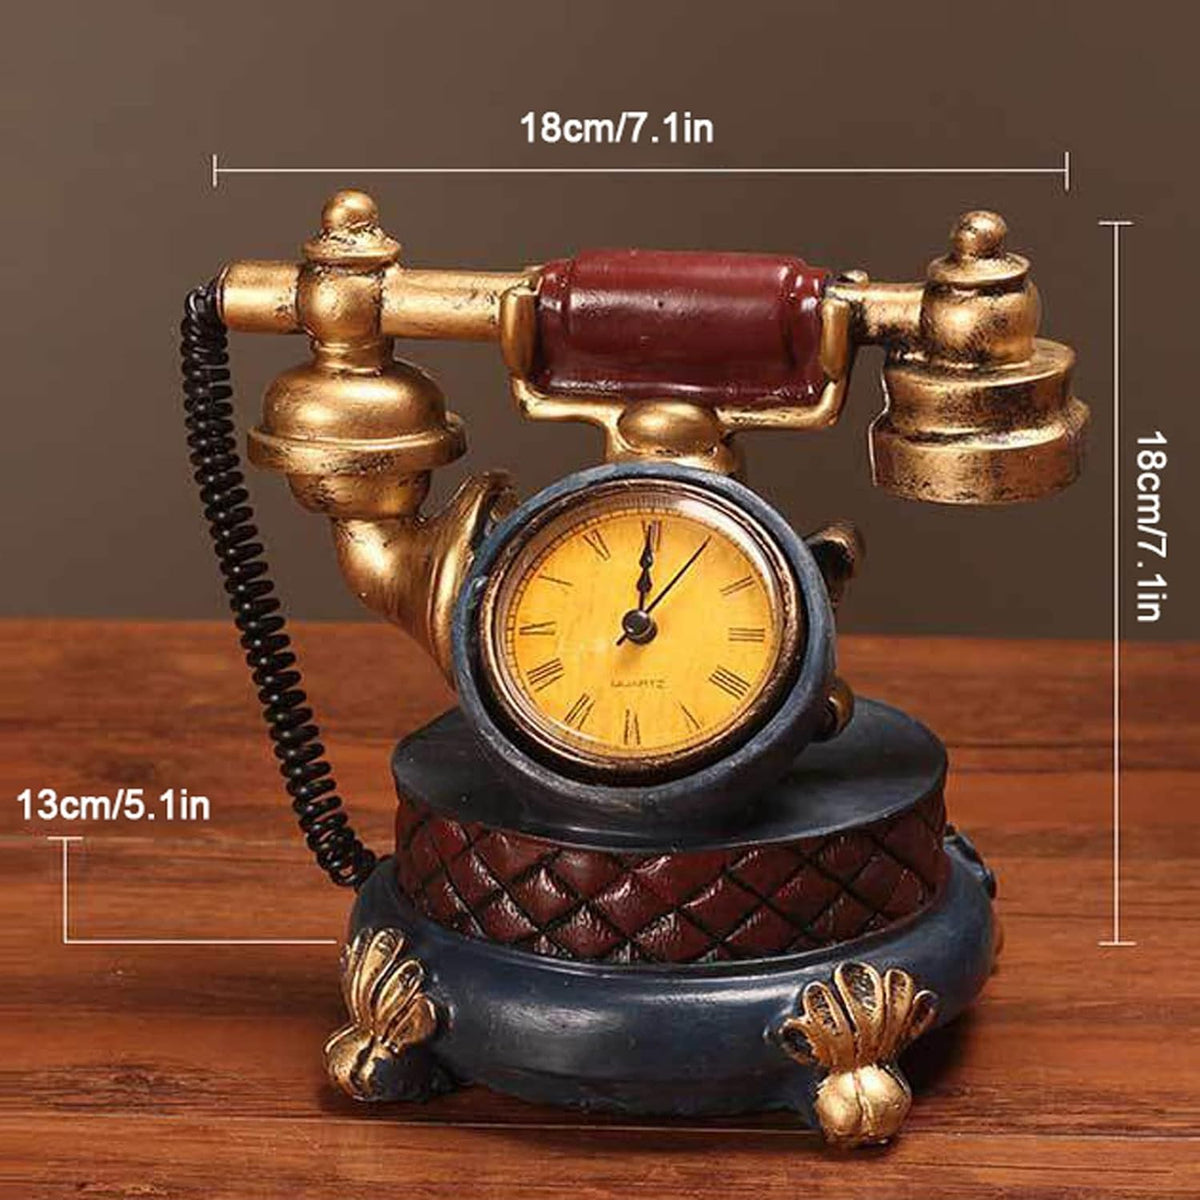 Vintage Corded Telephone Dial Model | Home Décor